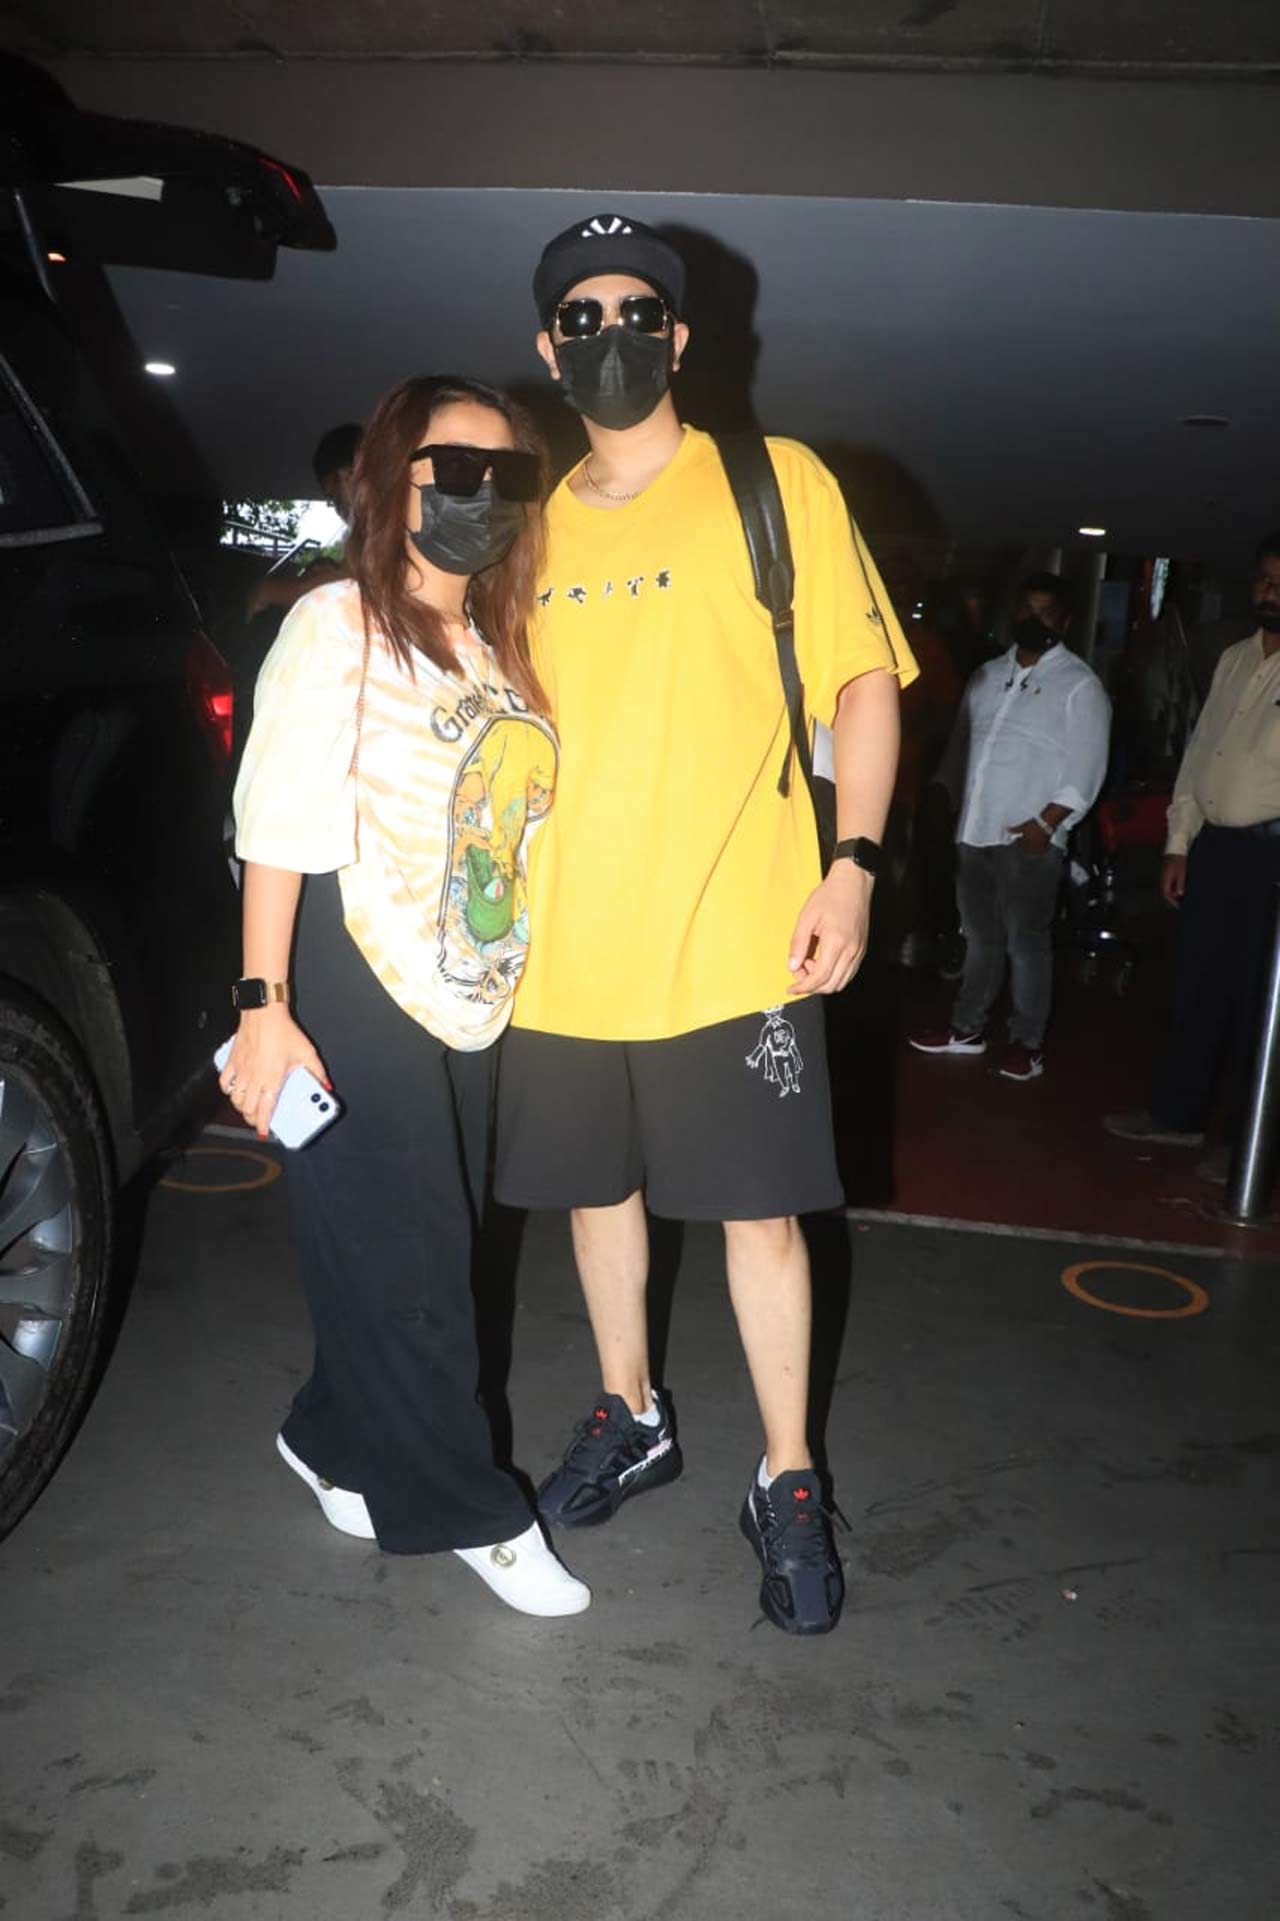 Neha Kakkar and Rohanpreet Singh were also spotted at the Mumbai airport. Neha and Rohan gained popularity ever since Neha made her relationship official on social media, and currently, the duo is setting some high relationship goals for all their fans out there.